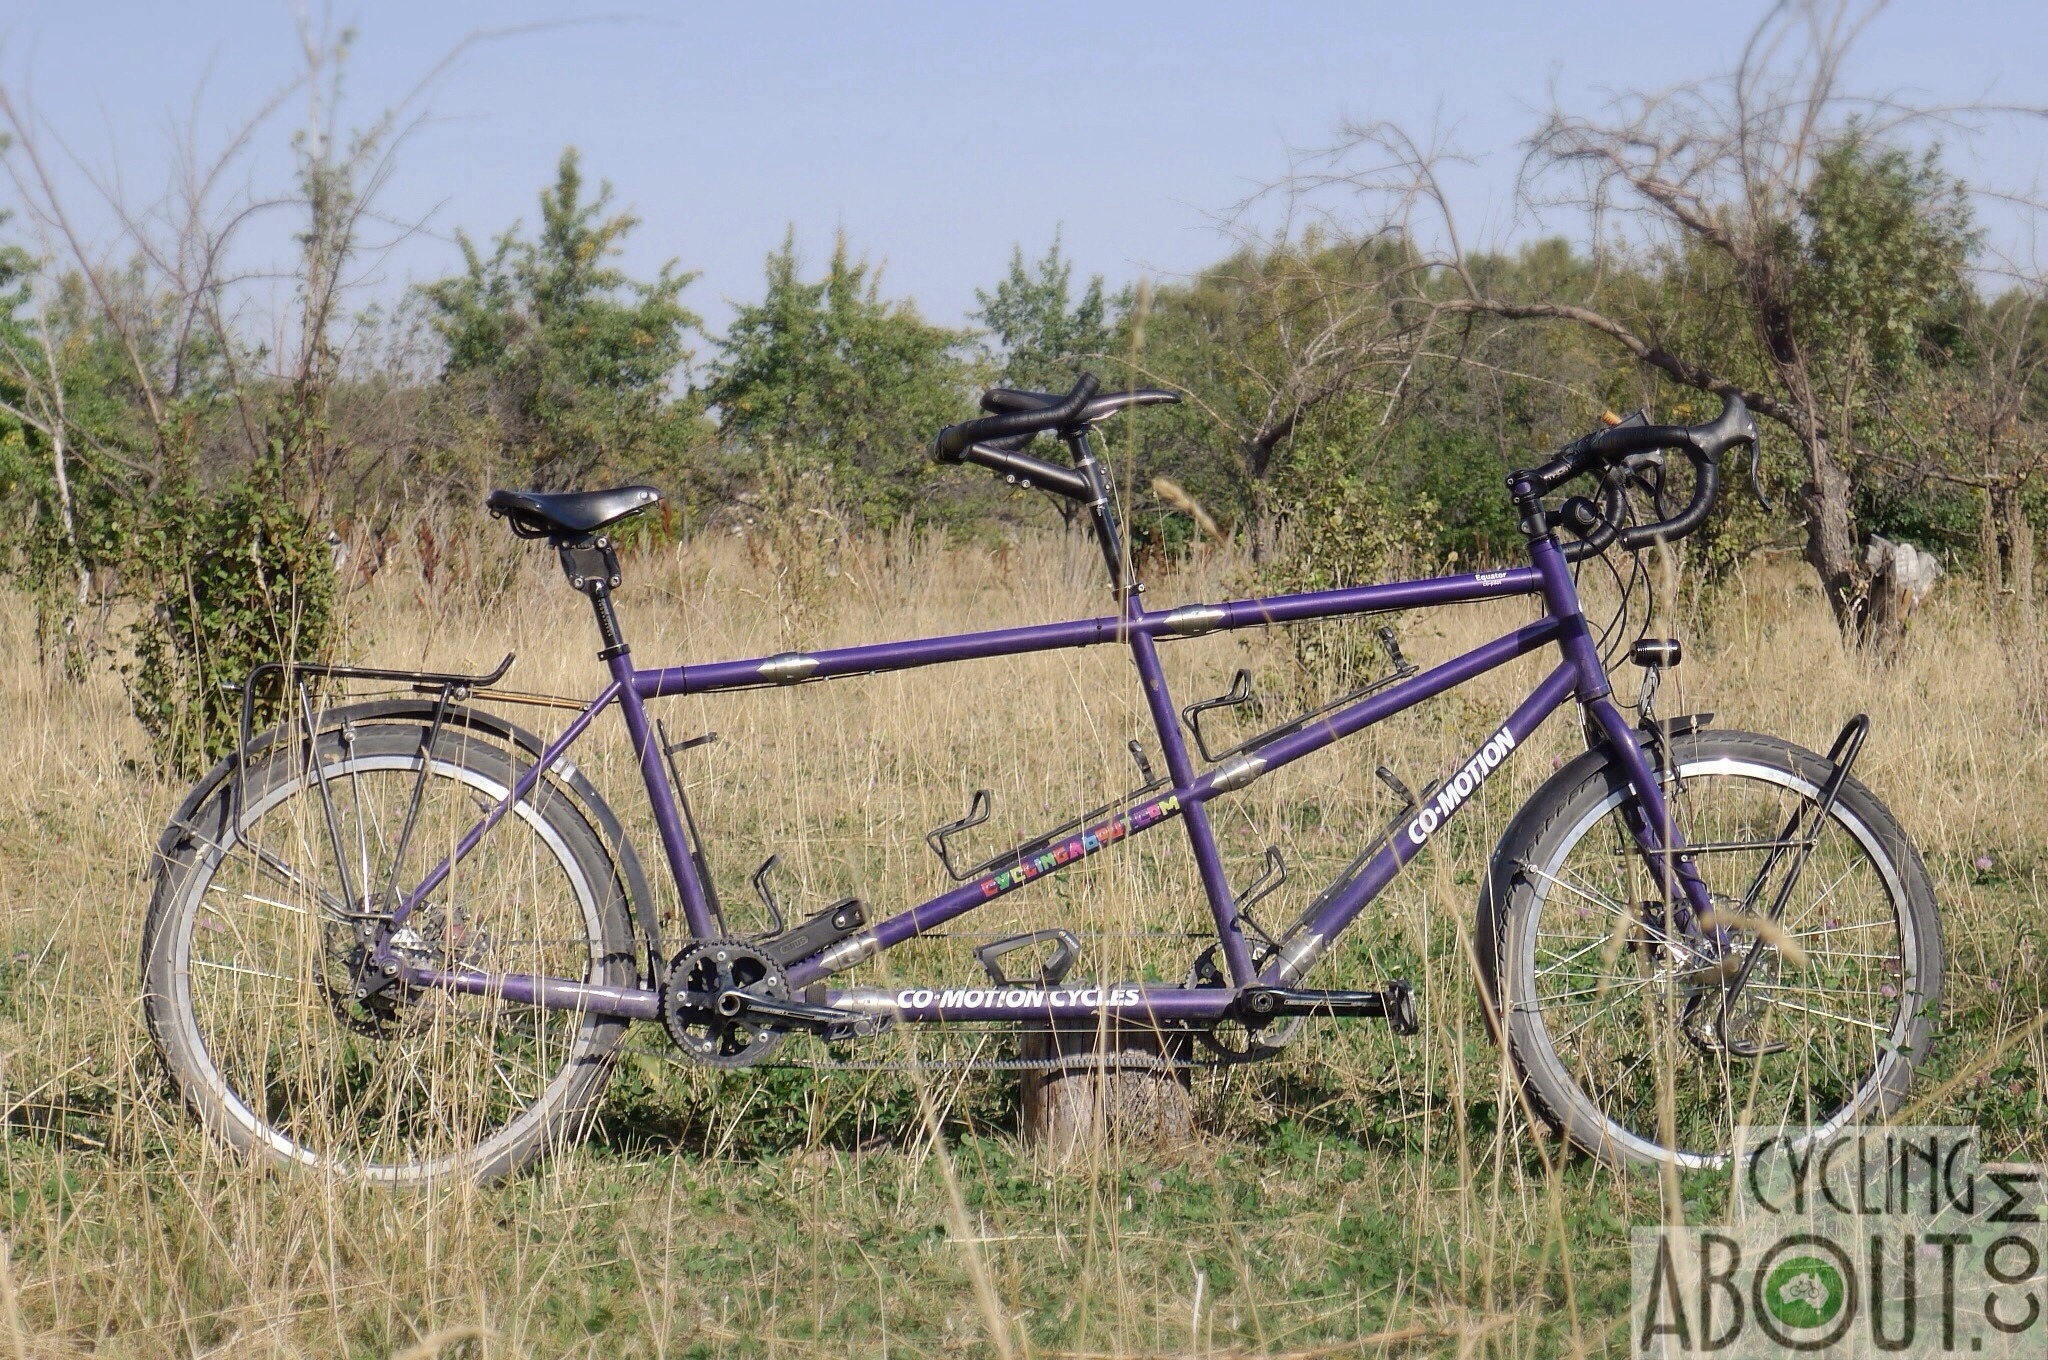 My Co-Motion tandem is a dream to ride - it’s super stiff and has a great geometry for touring.